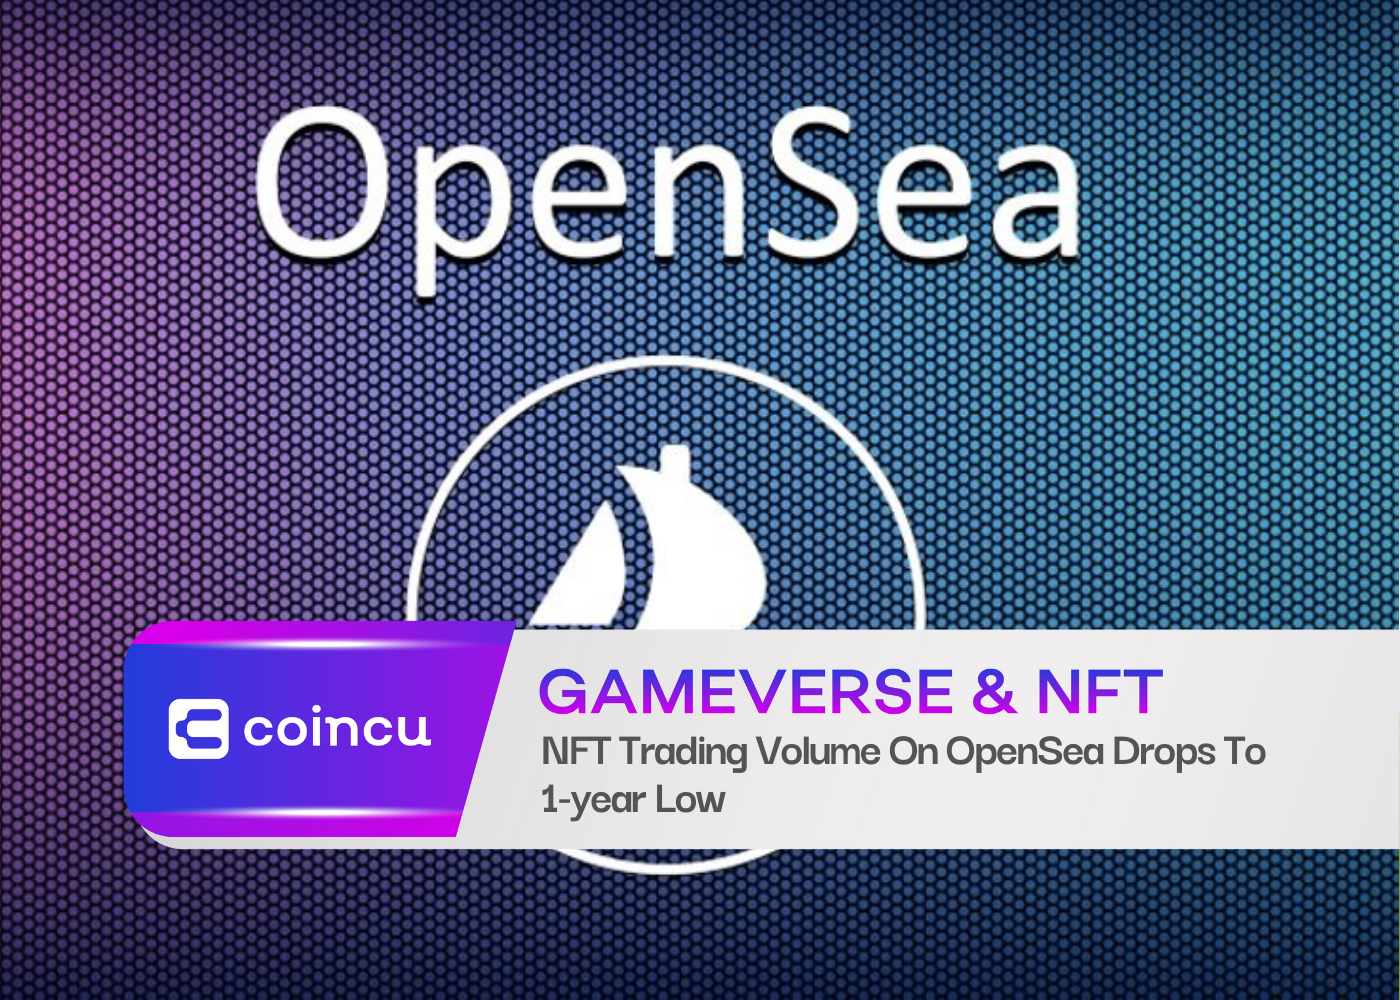 NFT Trading Volume On OpenSea Drops To 1-year Low